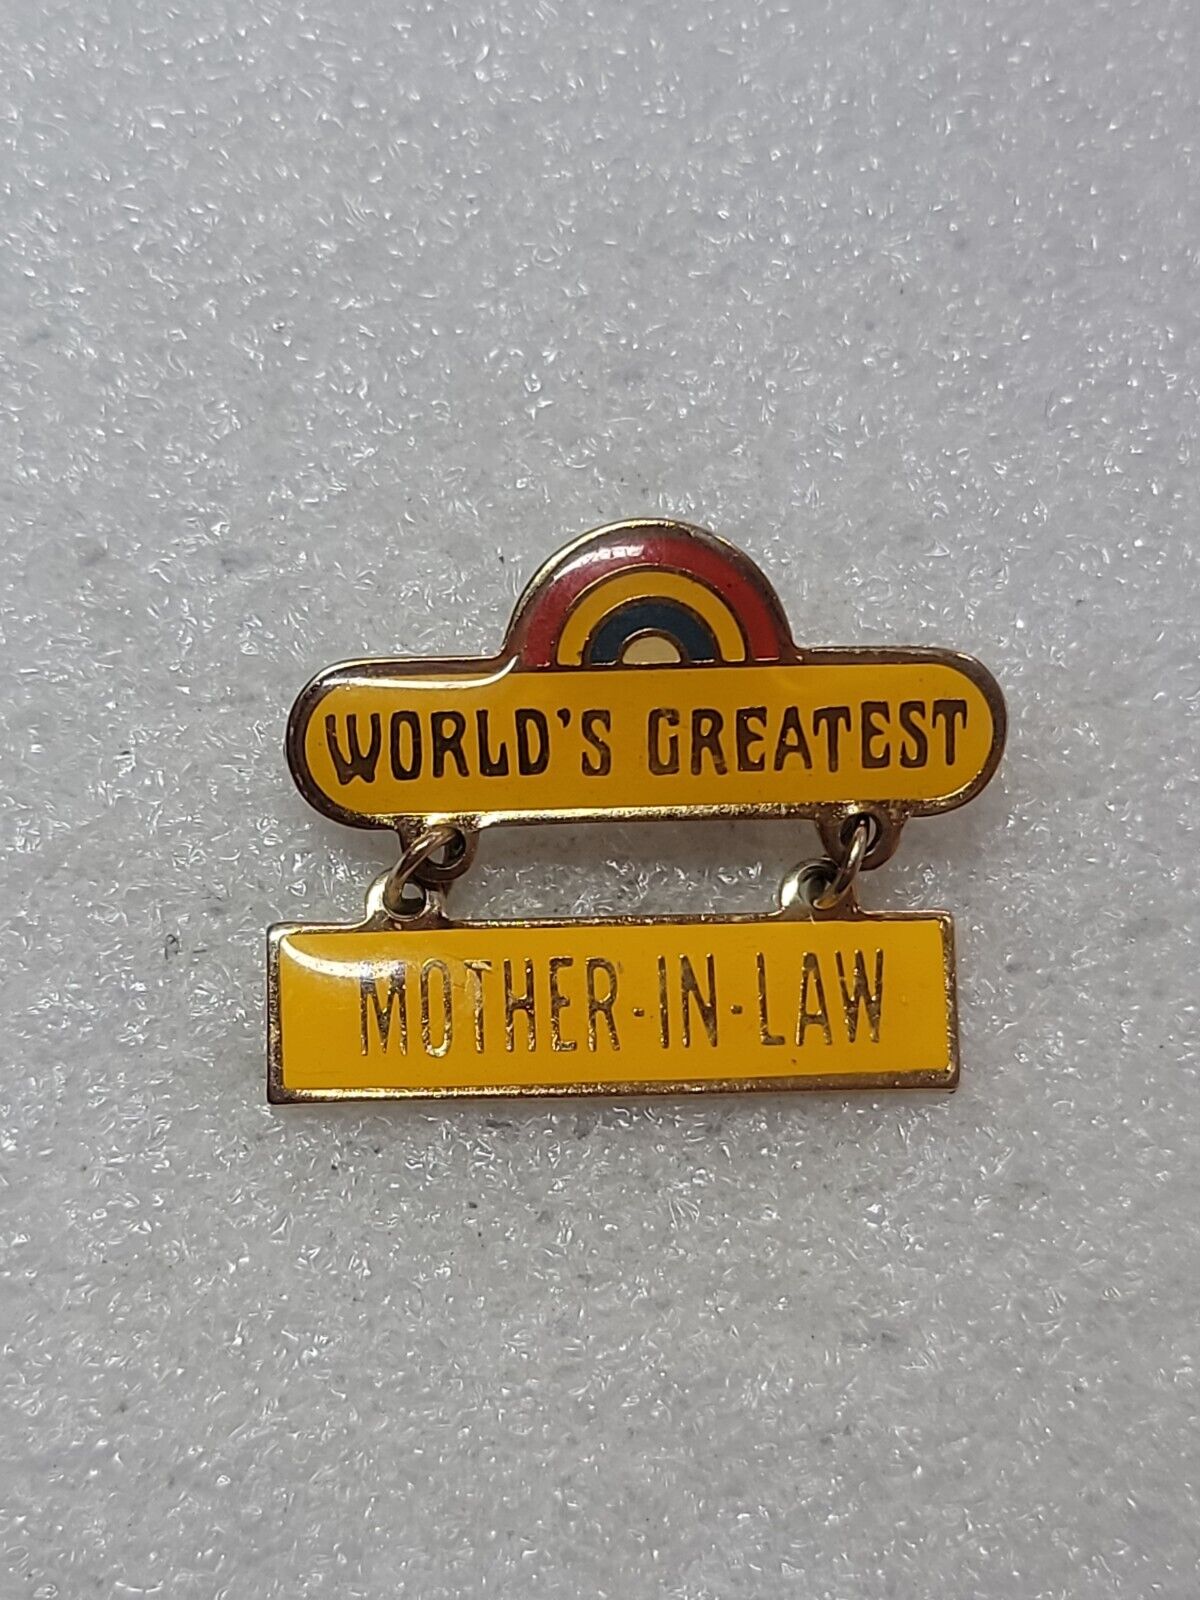 World\'s Greatest Mother In Law Lapel Jacket Pin Rainbow Yellow Latch Clasp VTG